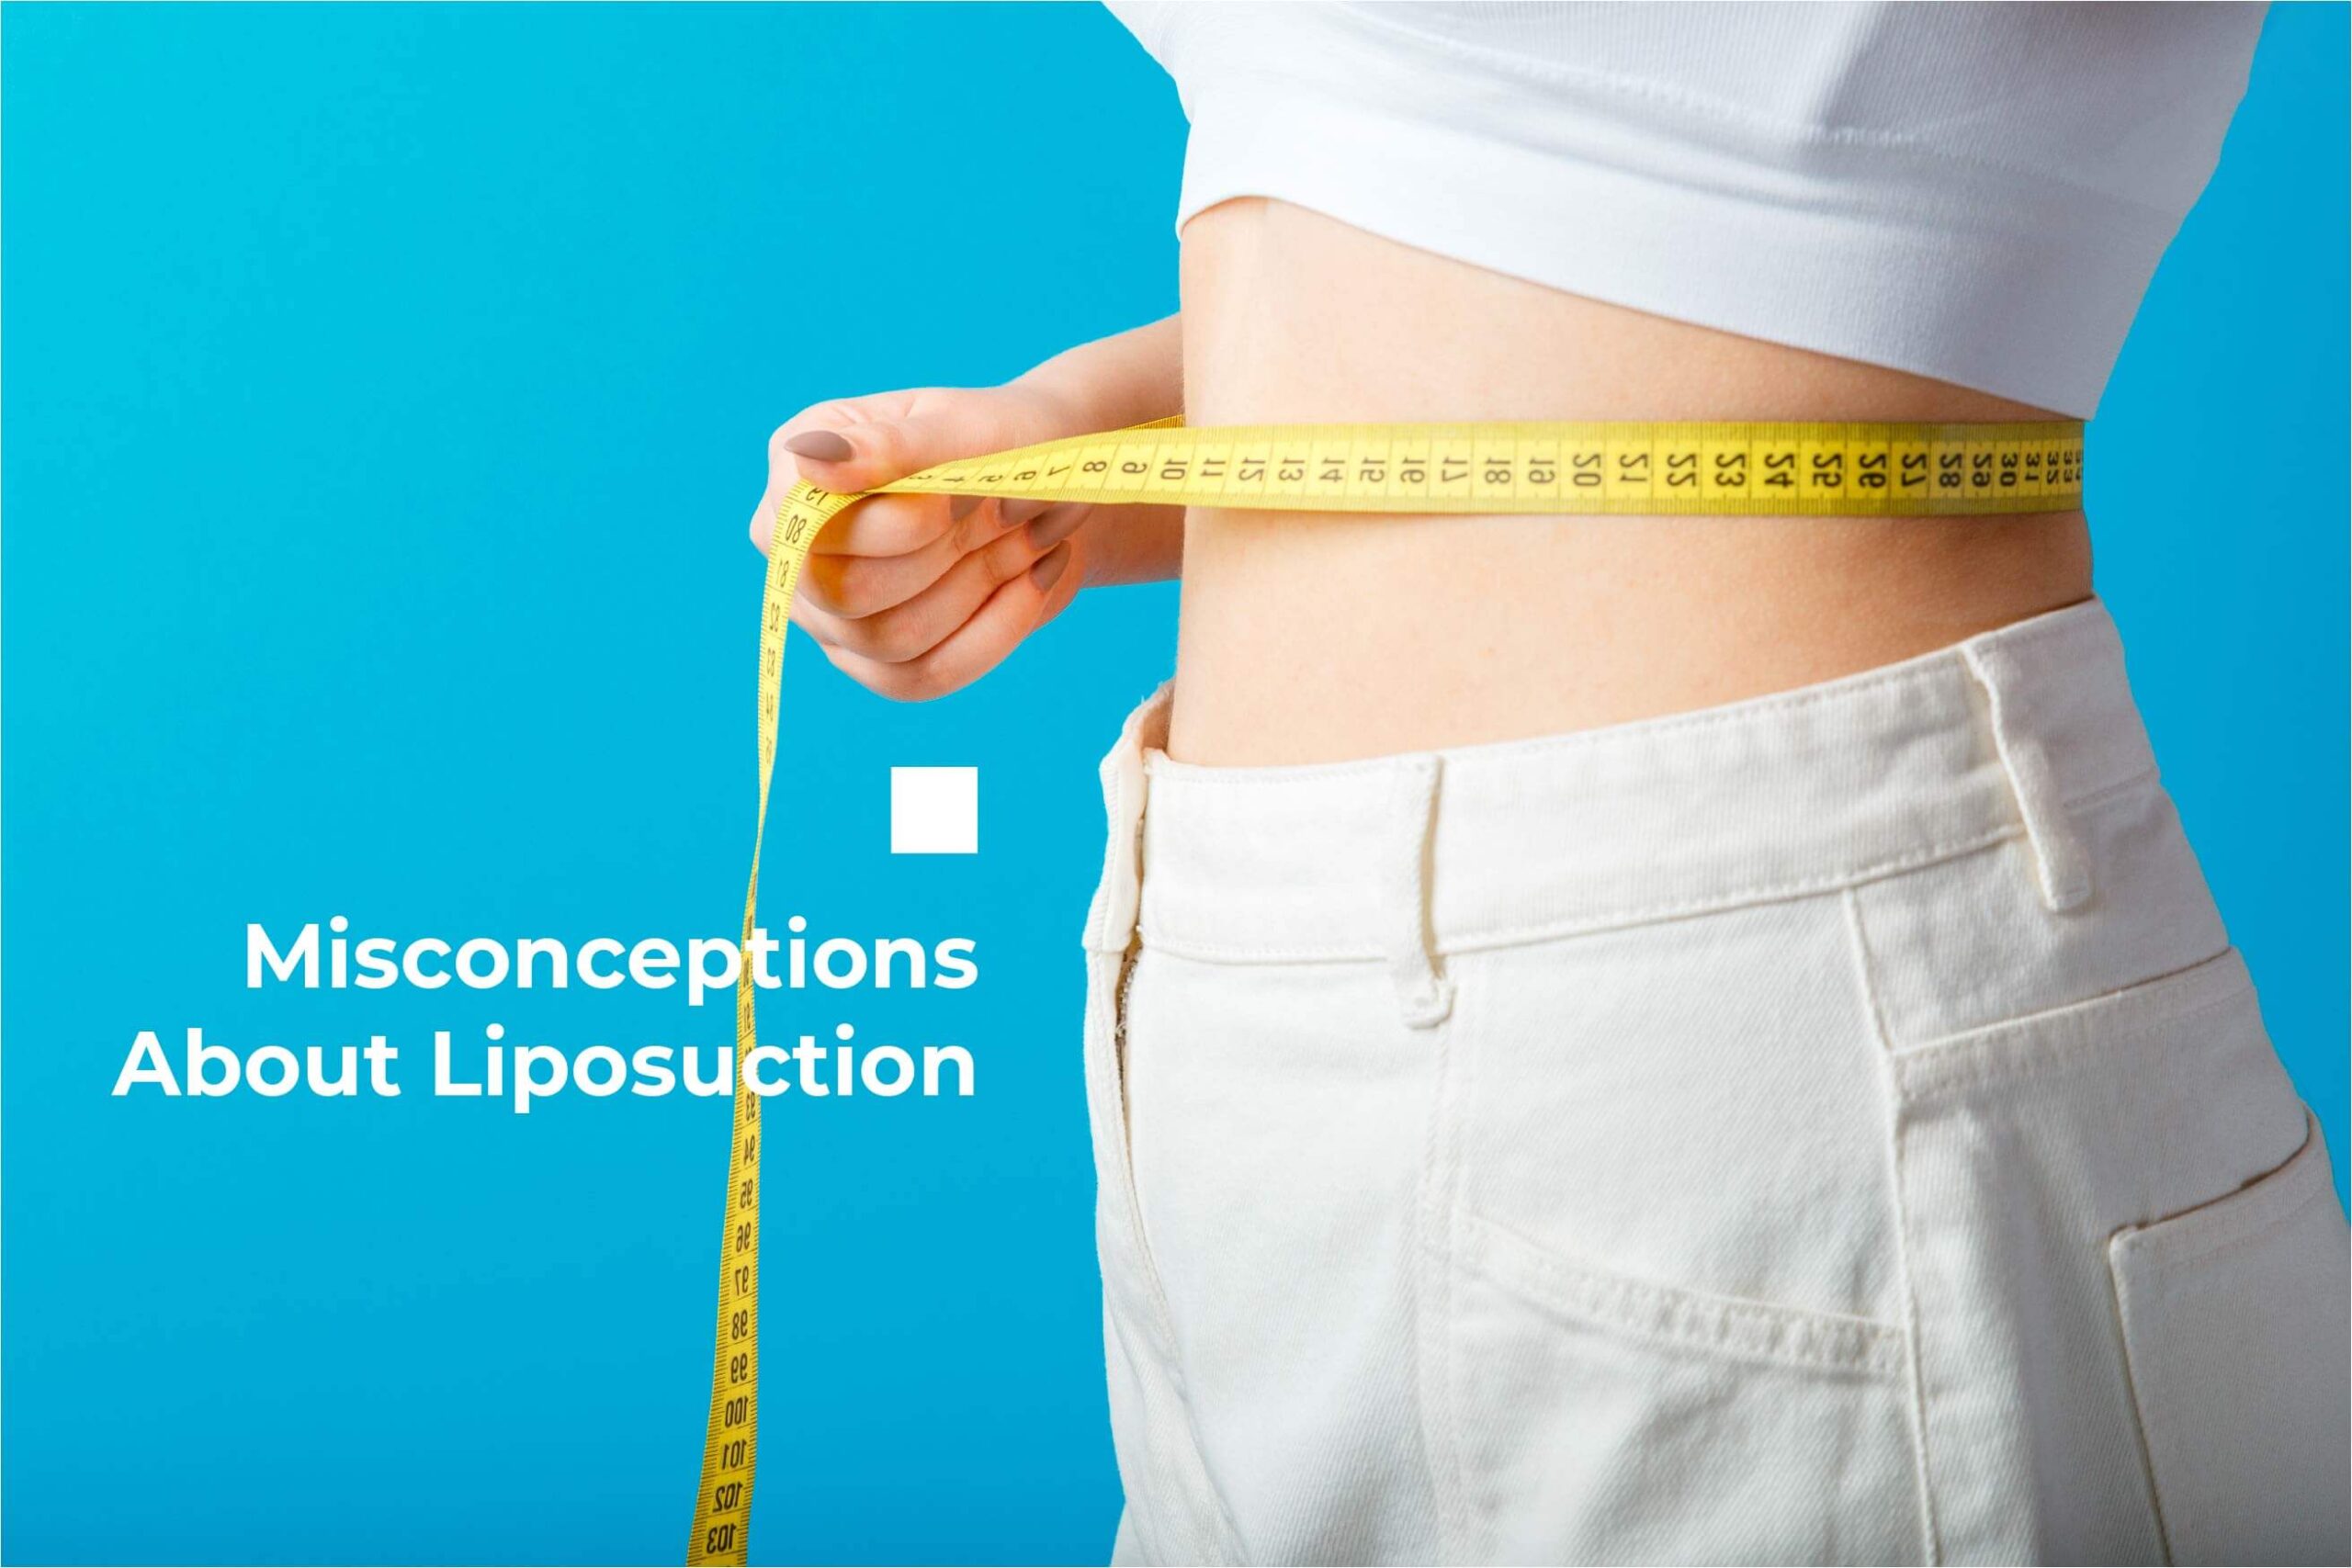 Misconceptions About Liposuction